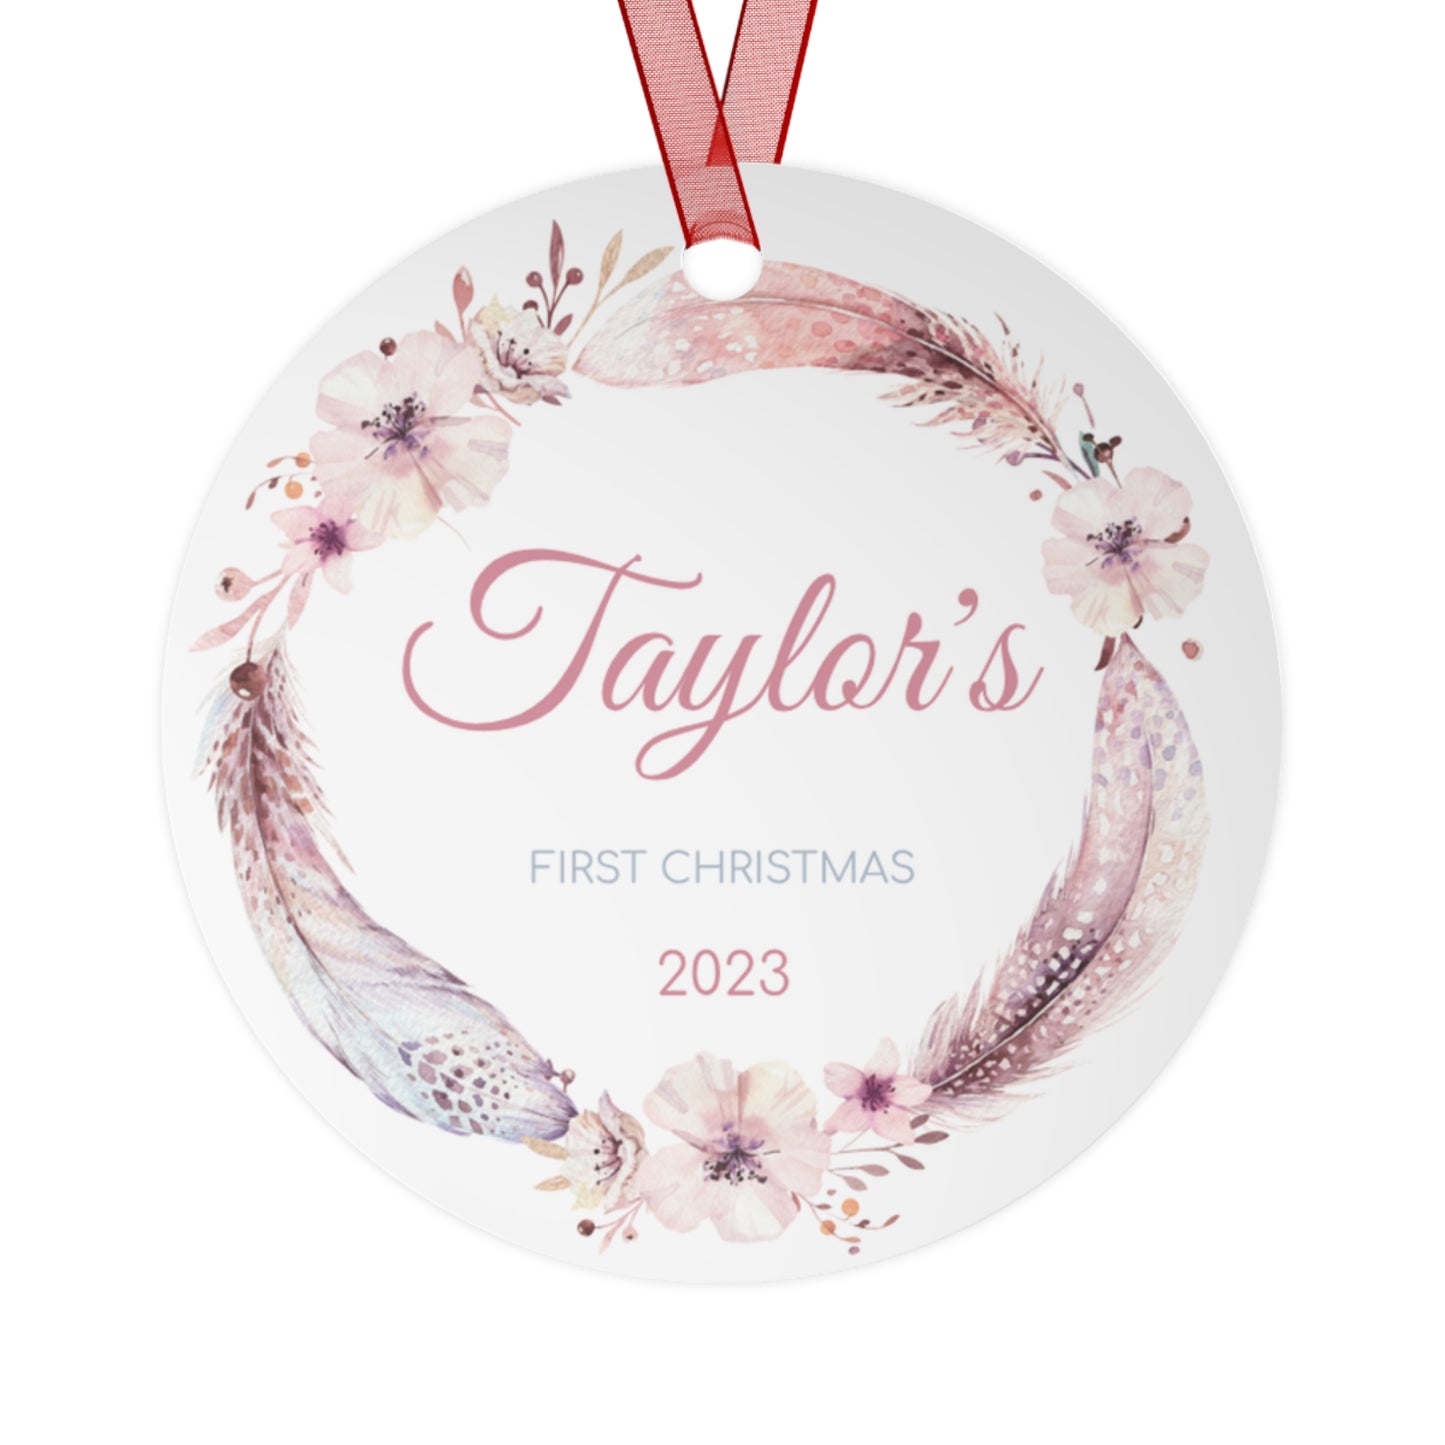 Feather Christmas Ornaments: Personalized Elegance